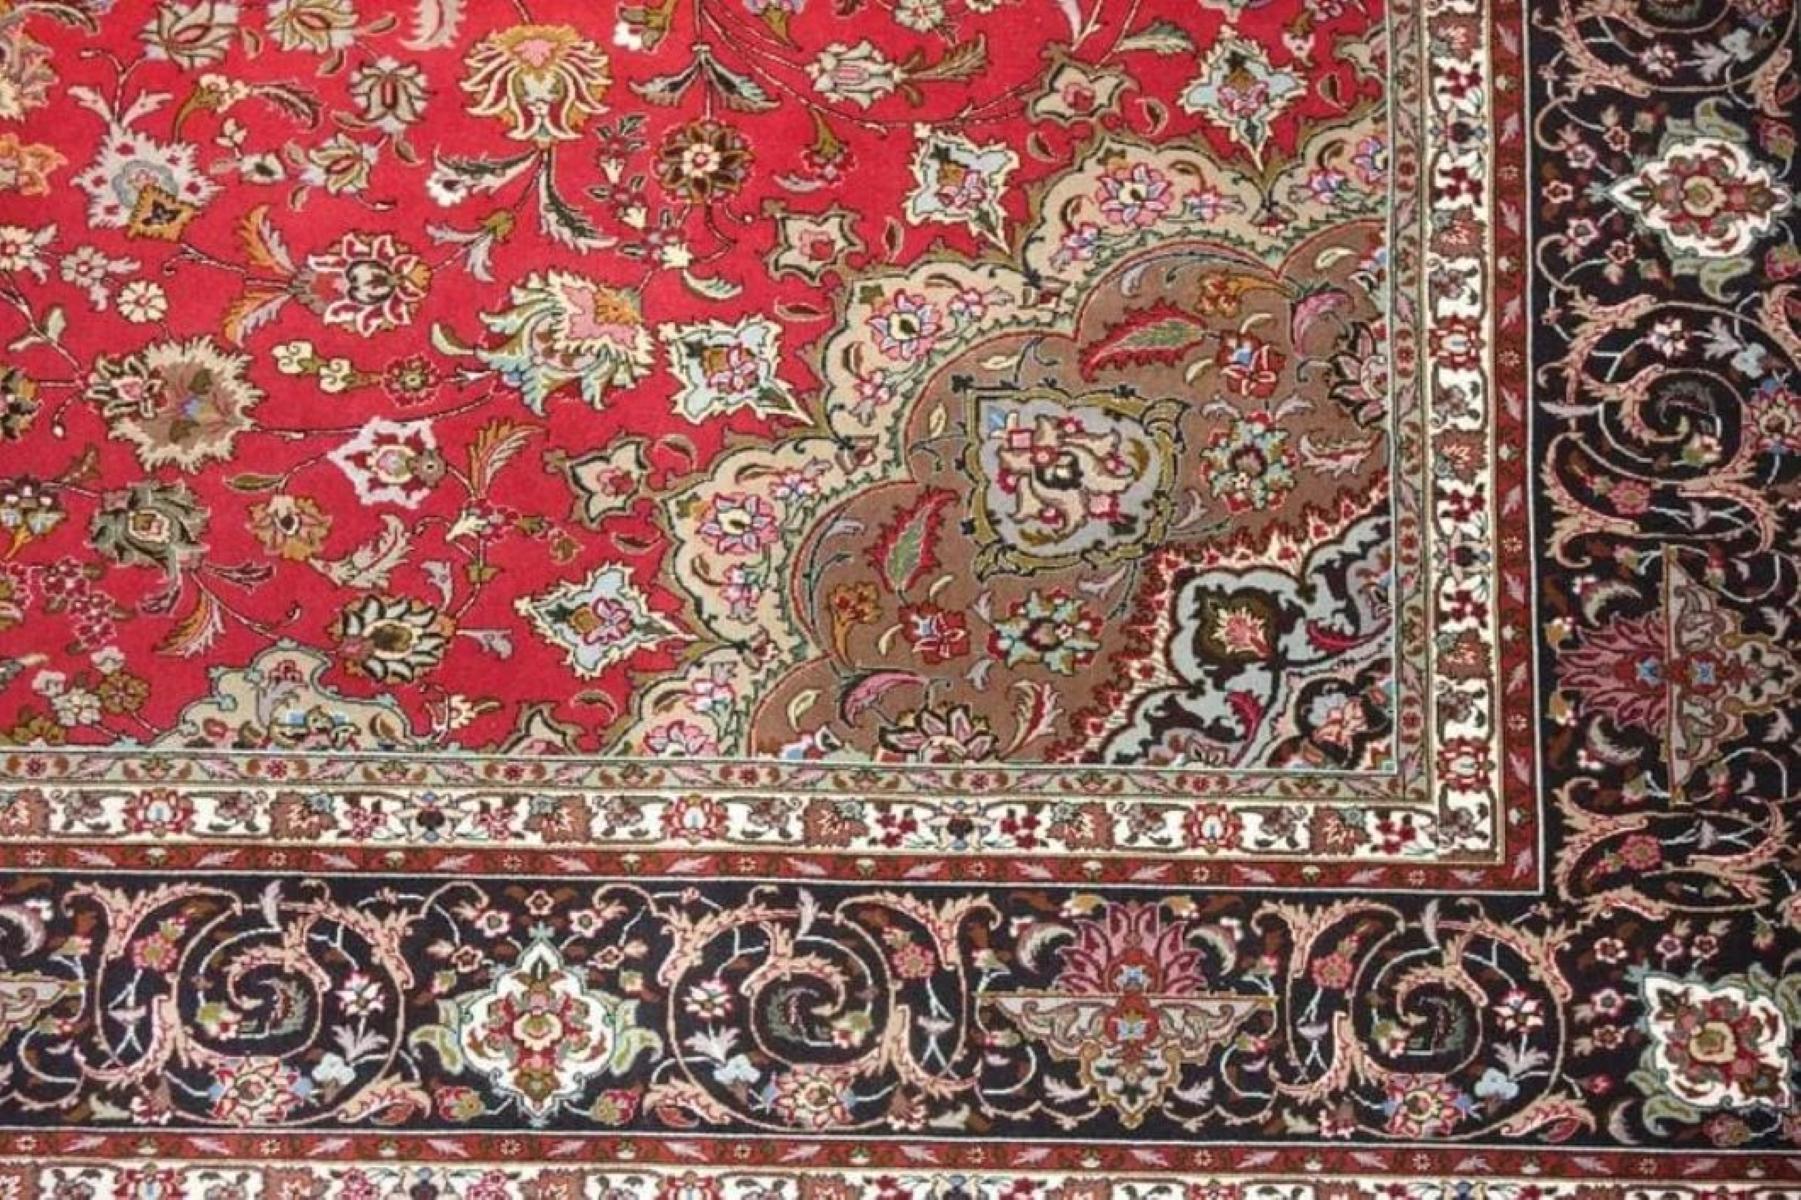 Very fine Persian Rug Tabriz 400 Knots per inch, Size 11.8 x 8.3 Iran Tabriz Wool and Silk. Around 5,500,000 knots tied by hand one by one. It takes 4 years to complete this piece of art.